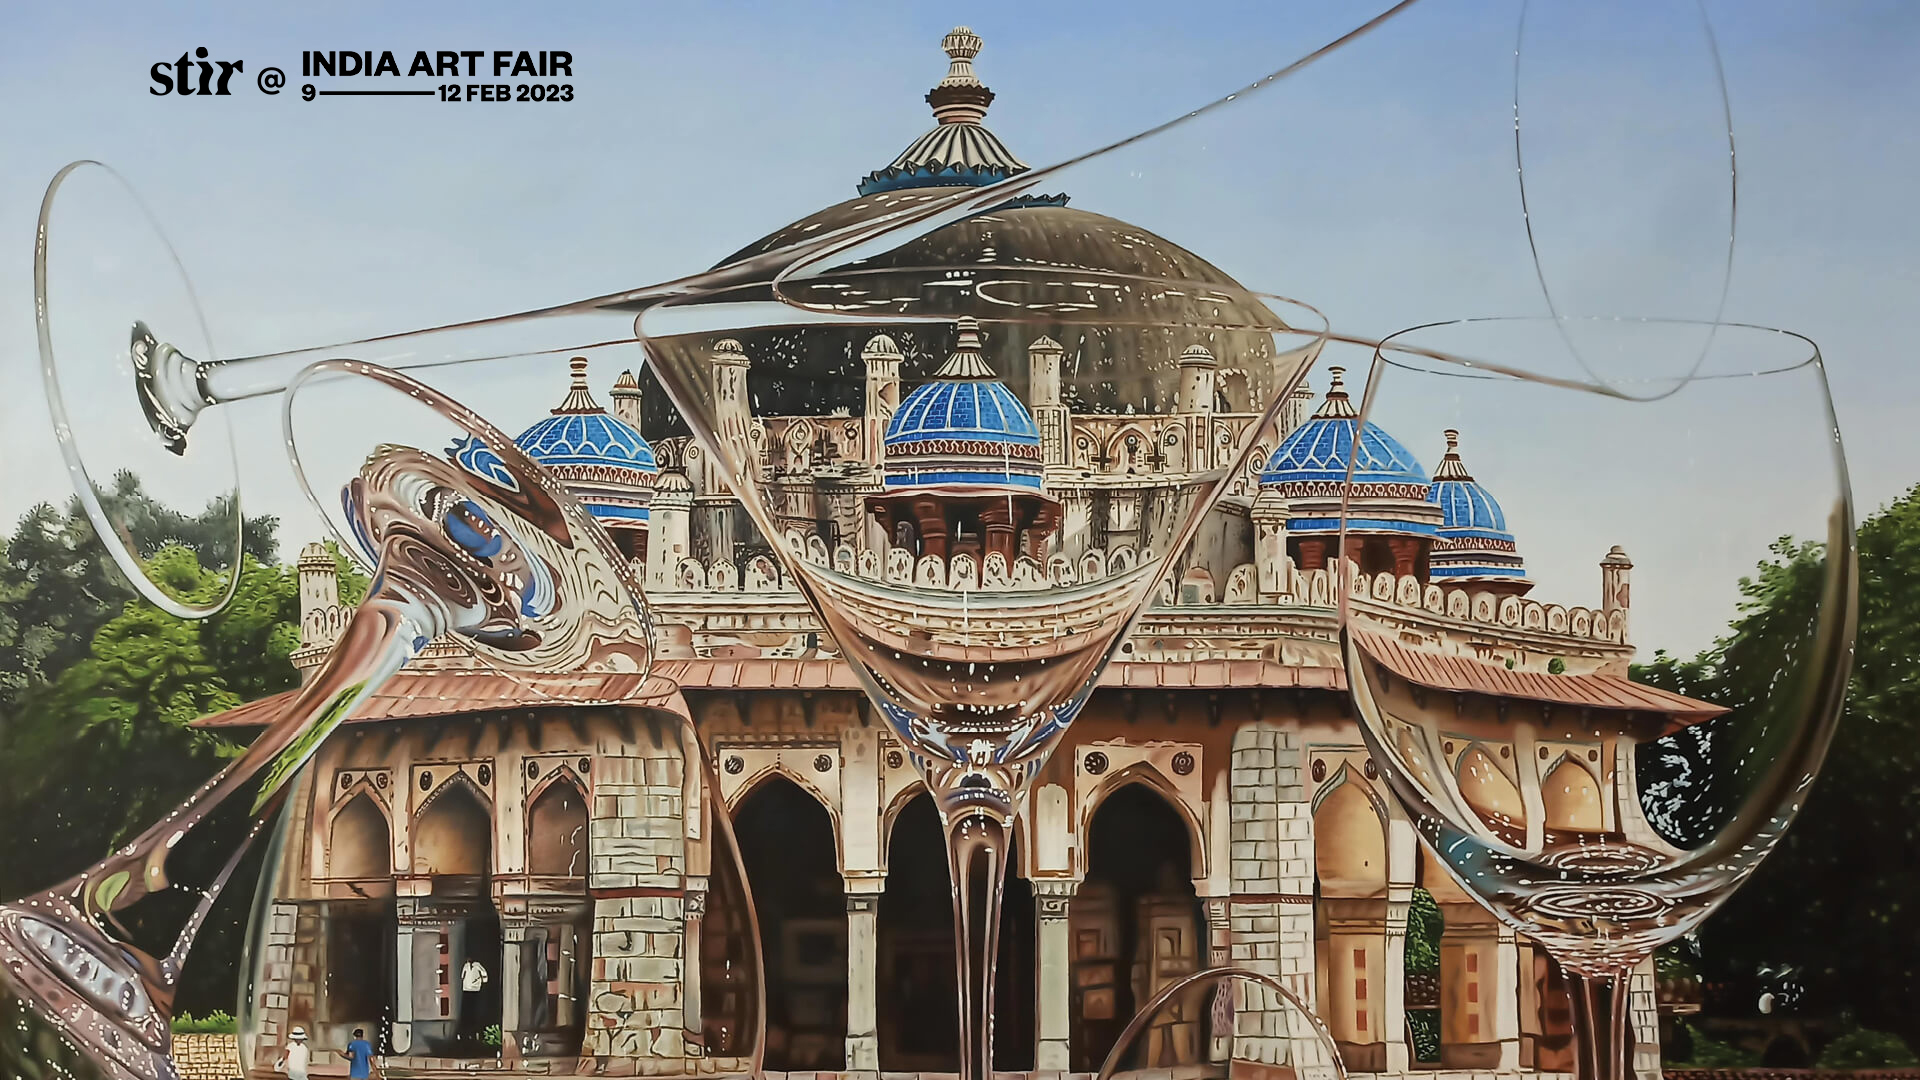 Does the India Art Fair 2023 mark a cultural rebirth for the Indian art scene?